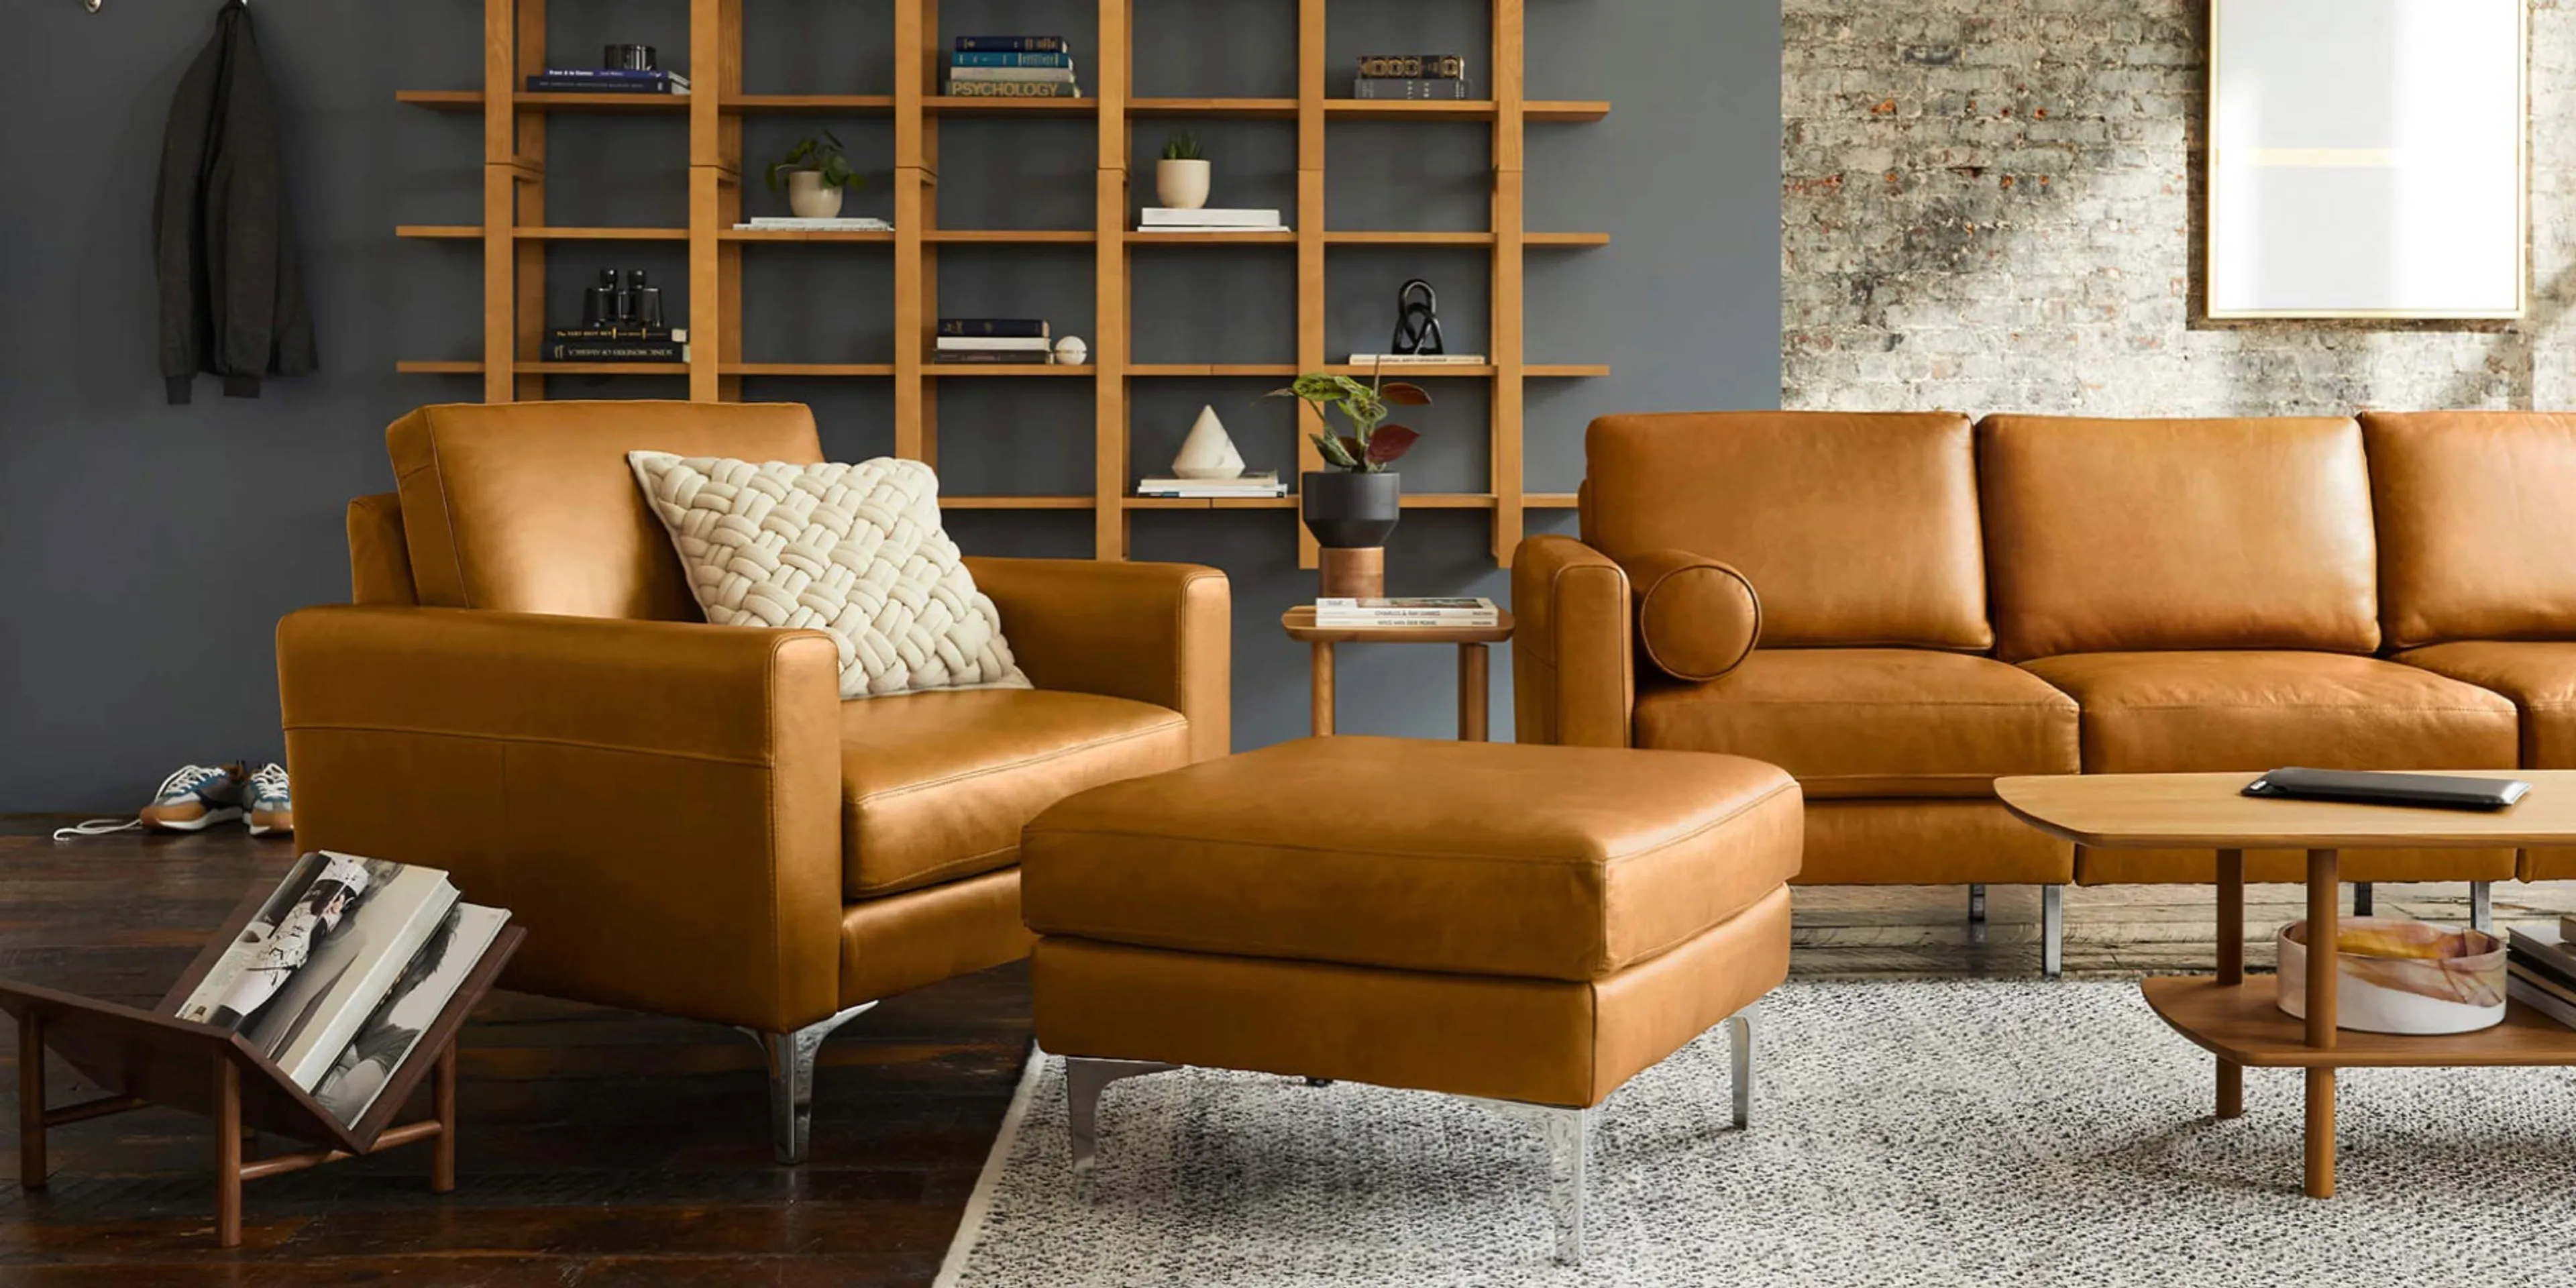 Mid-century living room with the Nomad Leather Sofa taking center stage